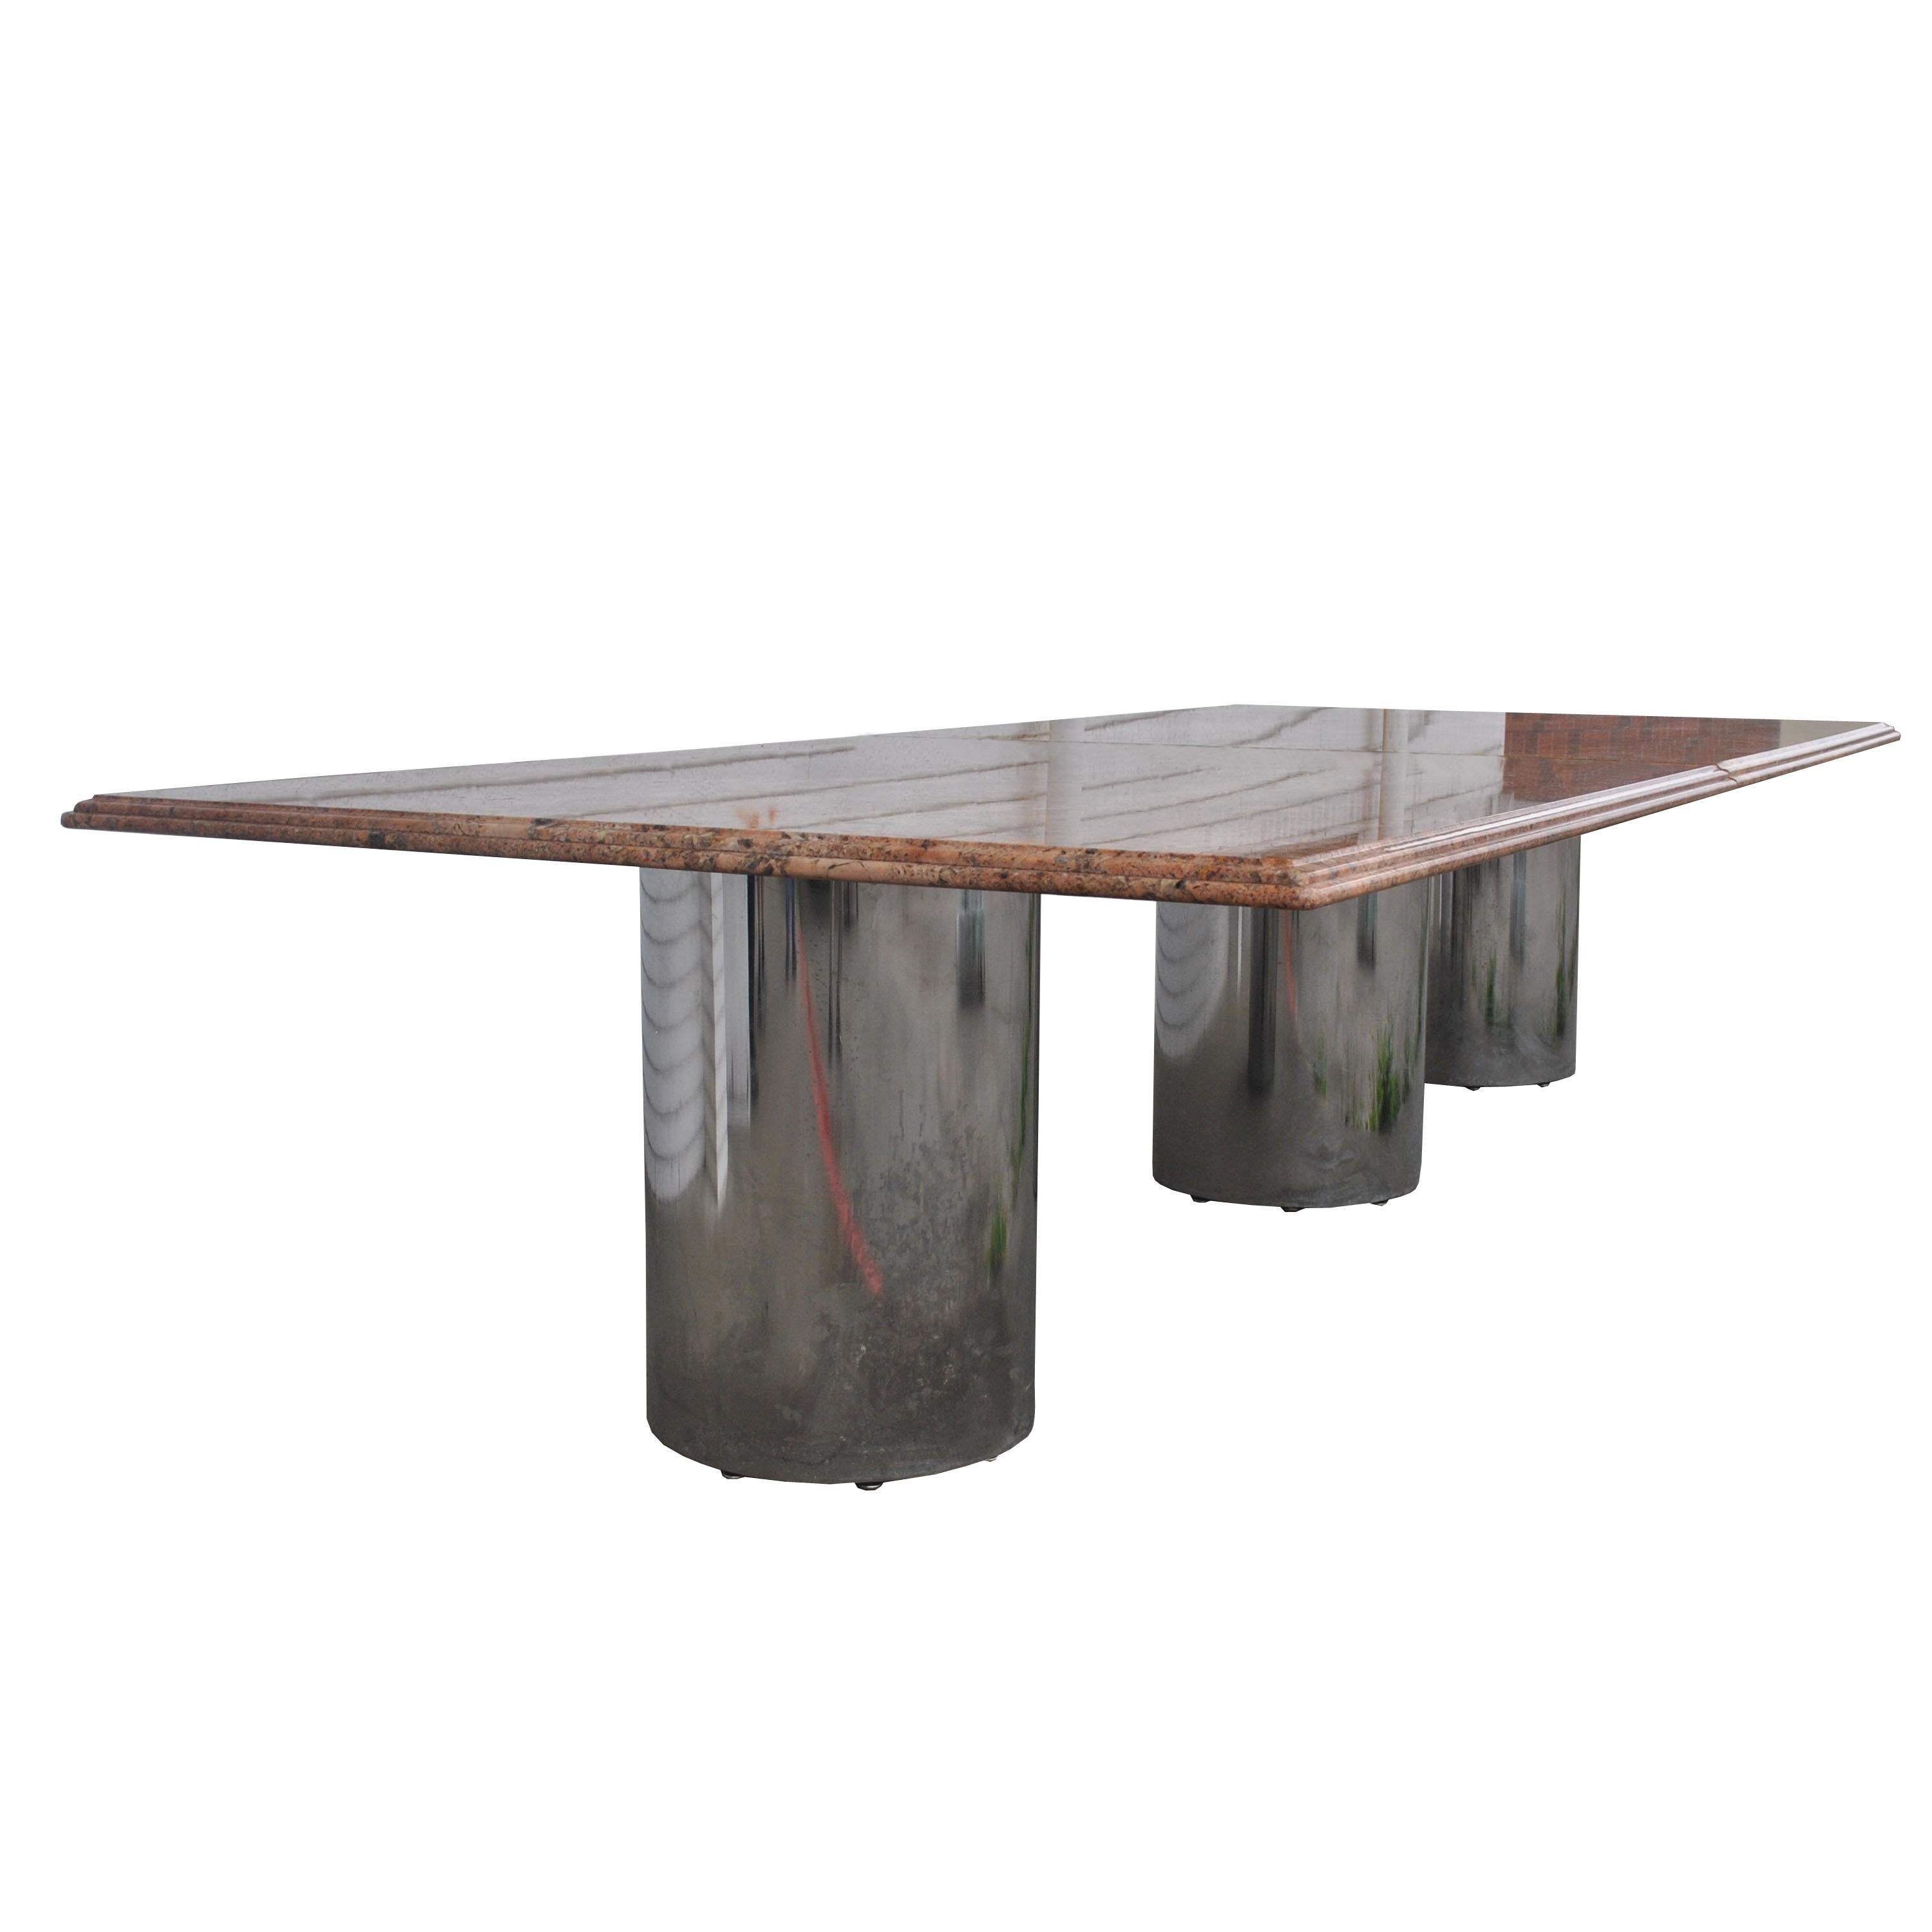 Granite chrome cylinder conference table 

Stunning vintage marble conference table. This table features a rich multicolored roman ogee edge top and three chrome cylinder bases.